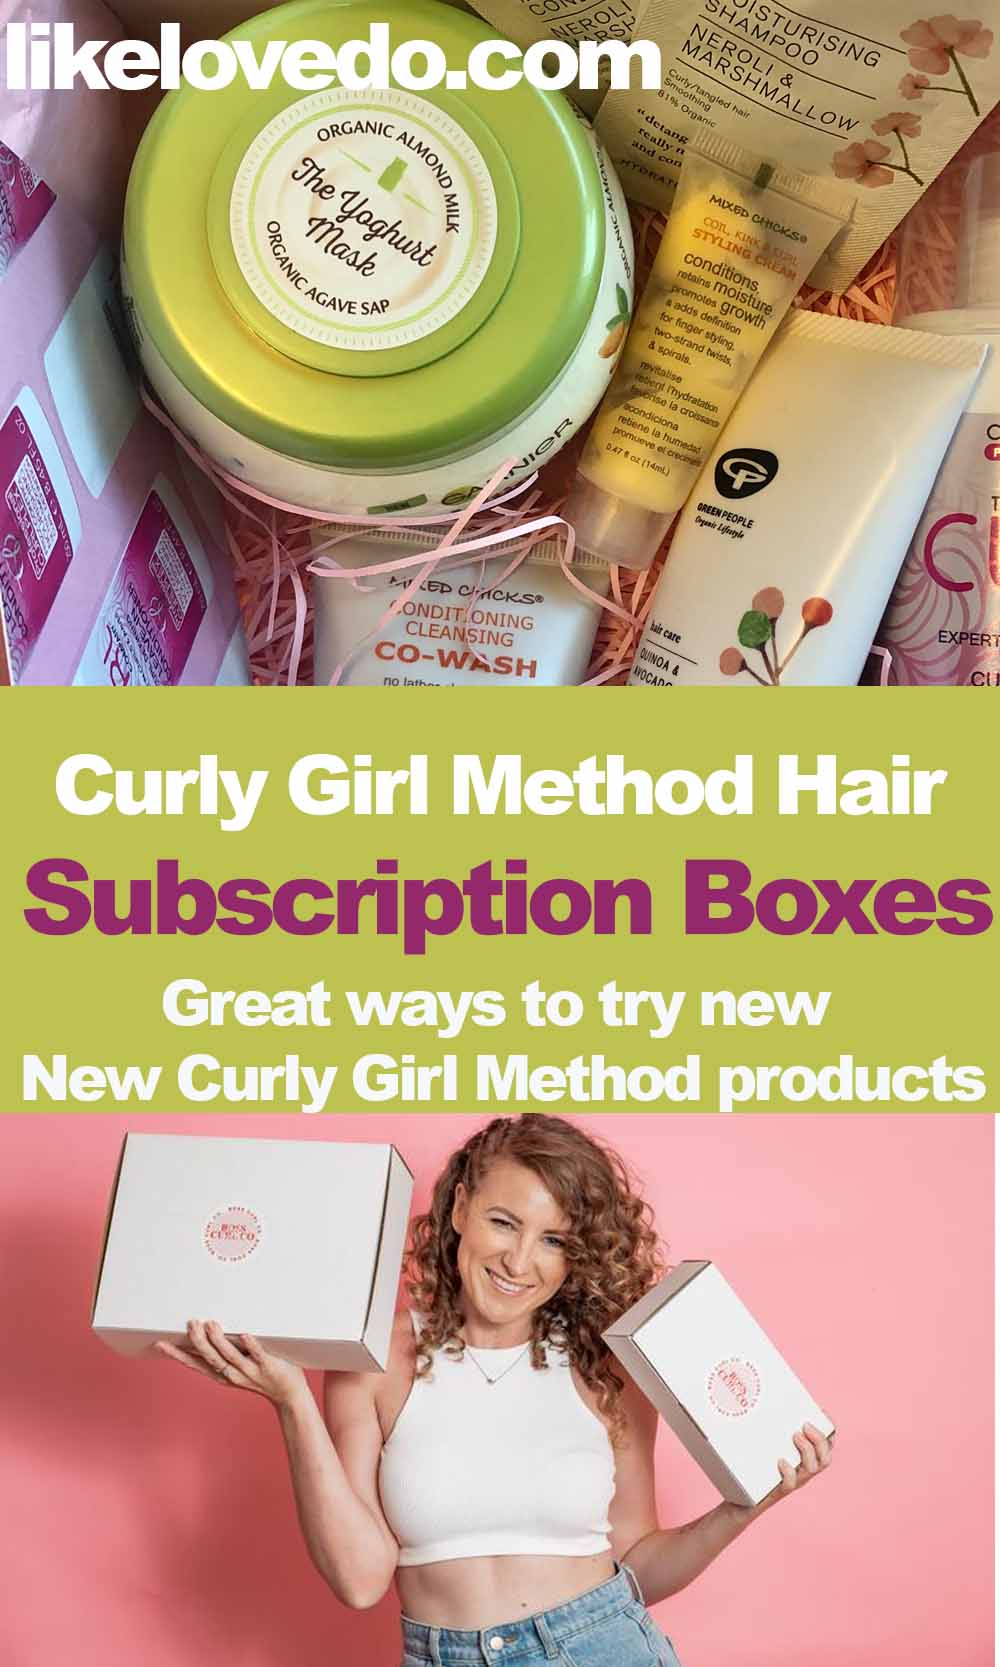 Curly girl pin subscription boxes all over the World